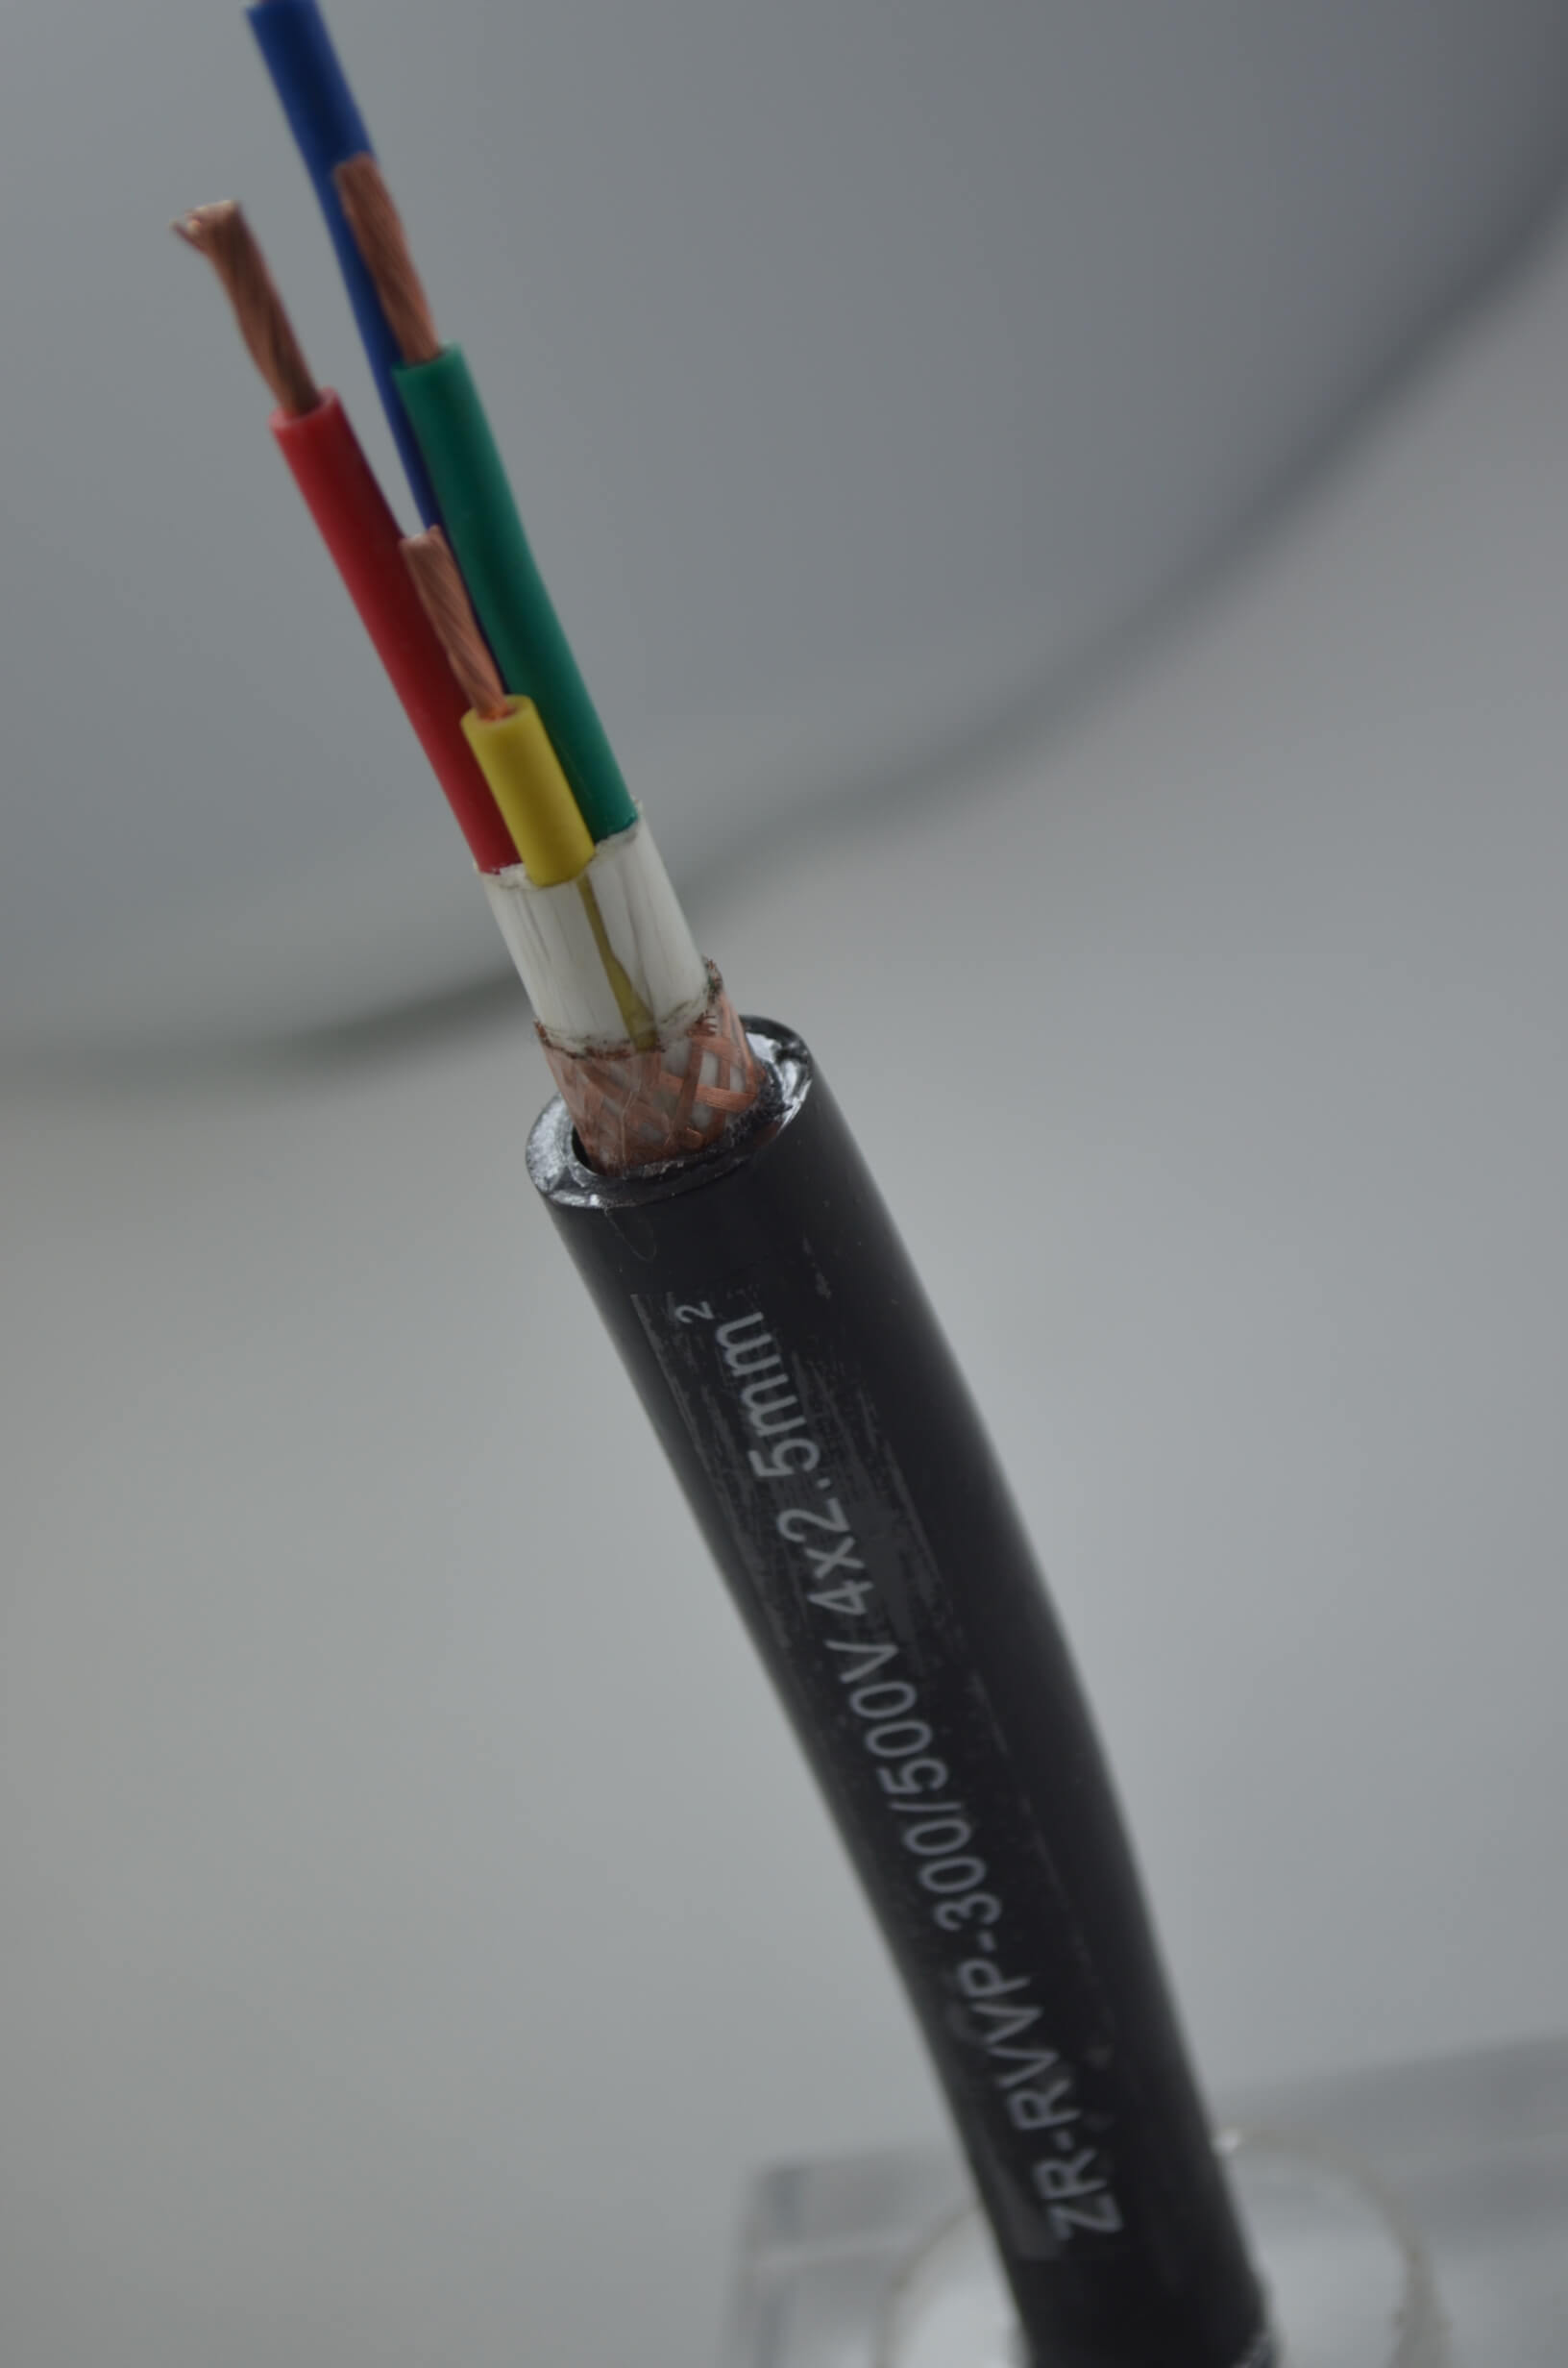 300/500v 4 core 0.5mm 0.75mm 1.5mm 2.5mm Flexible RVVP Shielded PVC Insulated Multi-core Copper Conductor Wire Braided Screened Flexible Wire Cable